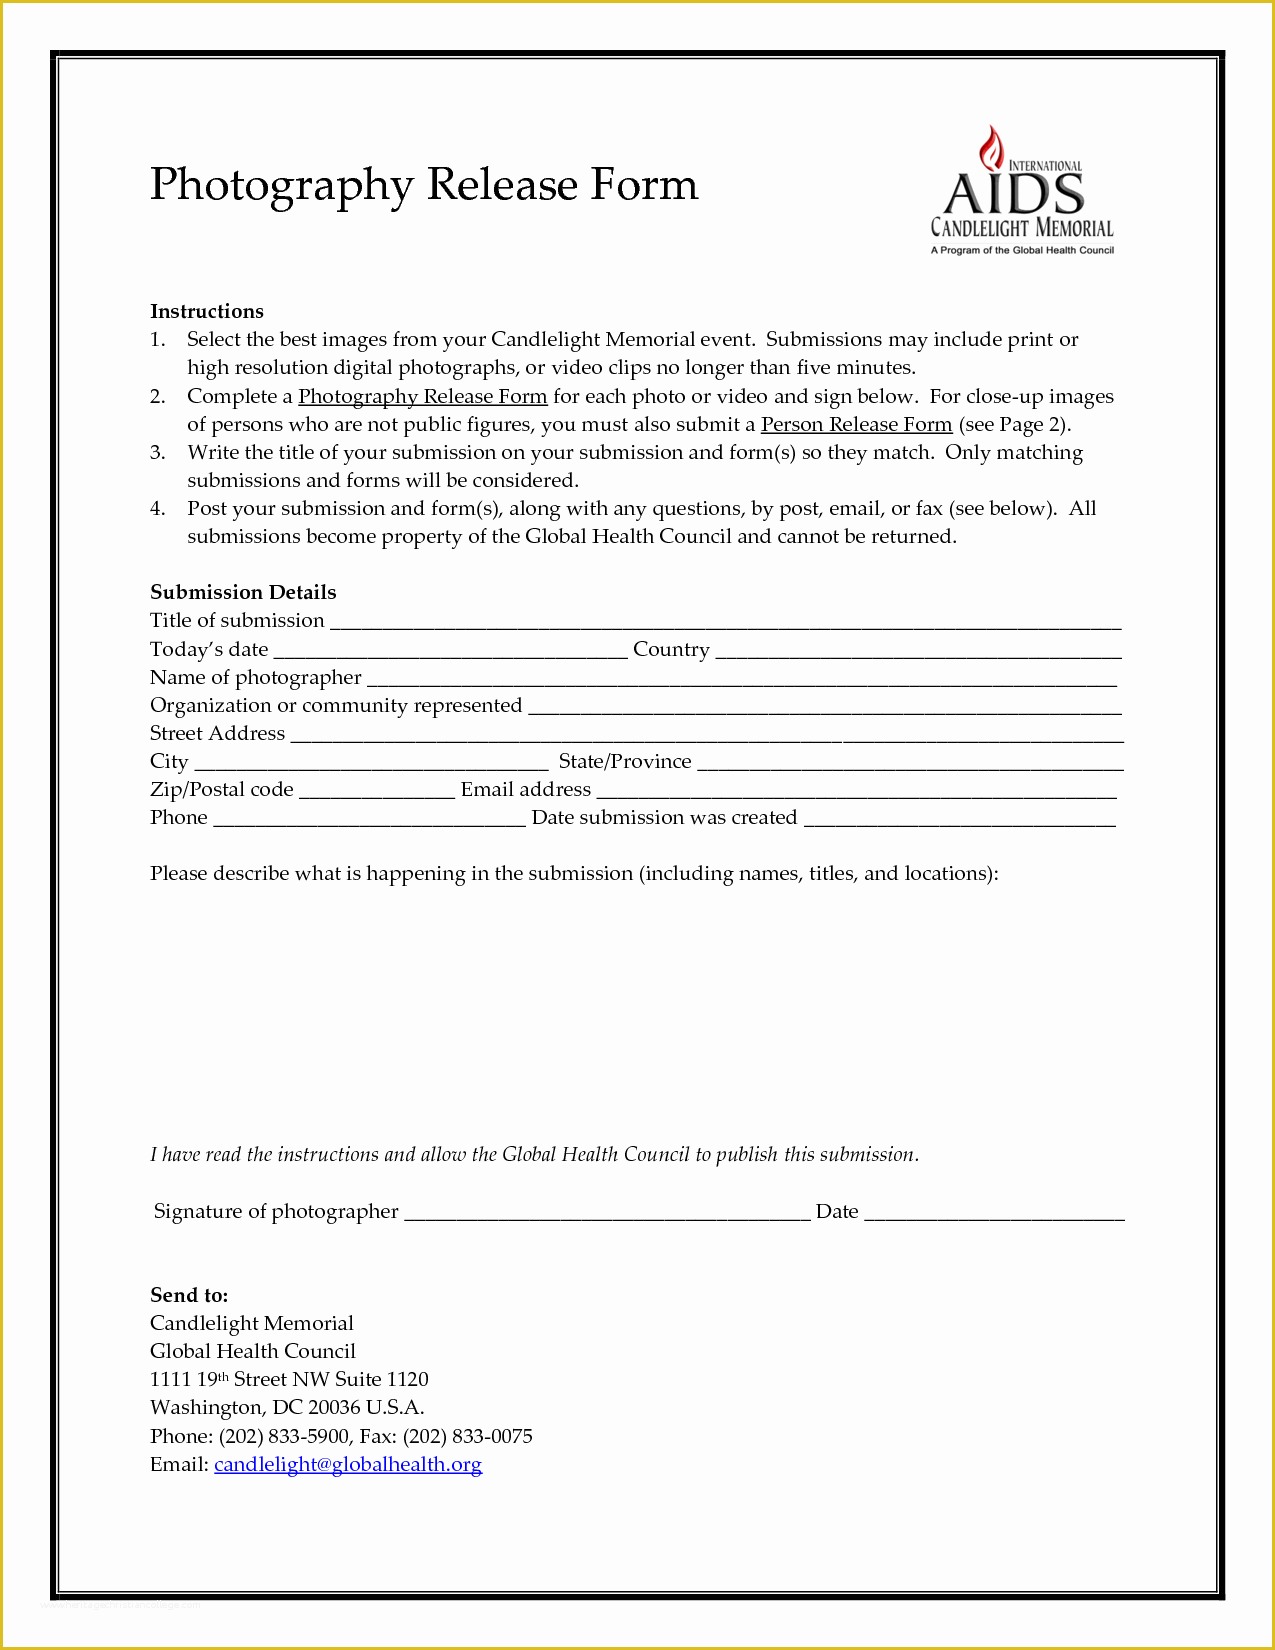 Free Photo and Video Release form Template Of 6 Legal Constraints – 2015mirimstudent36